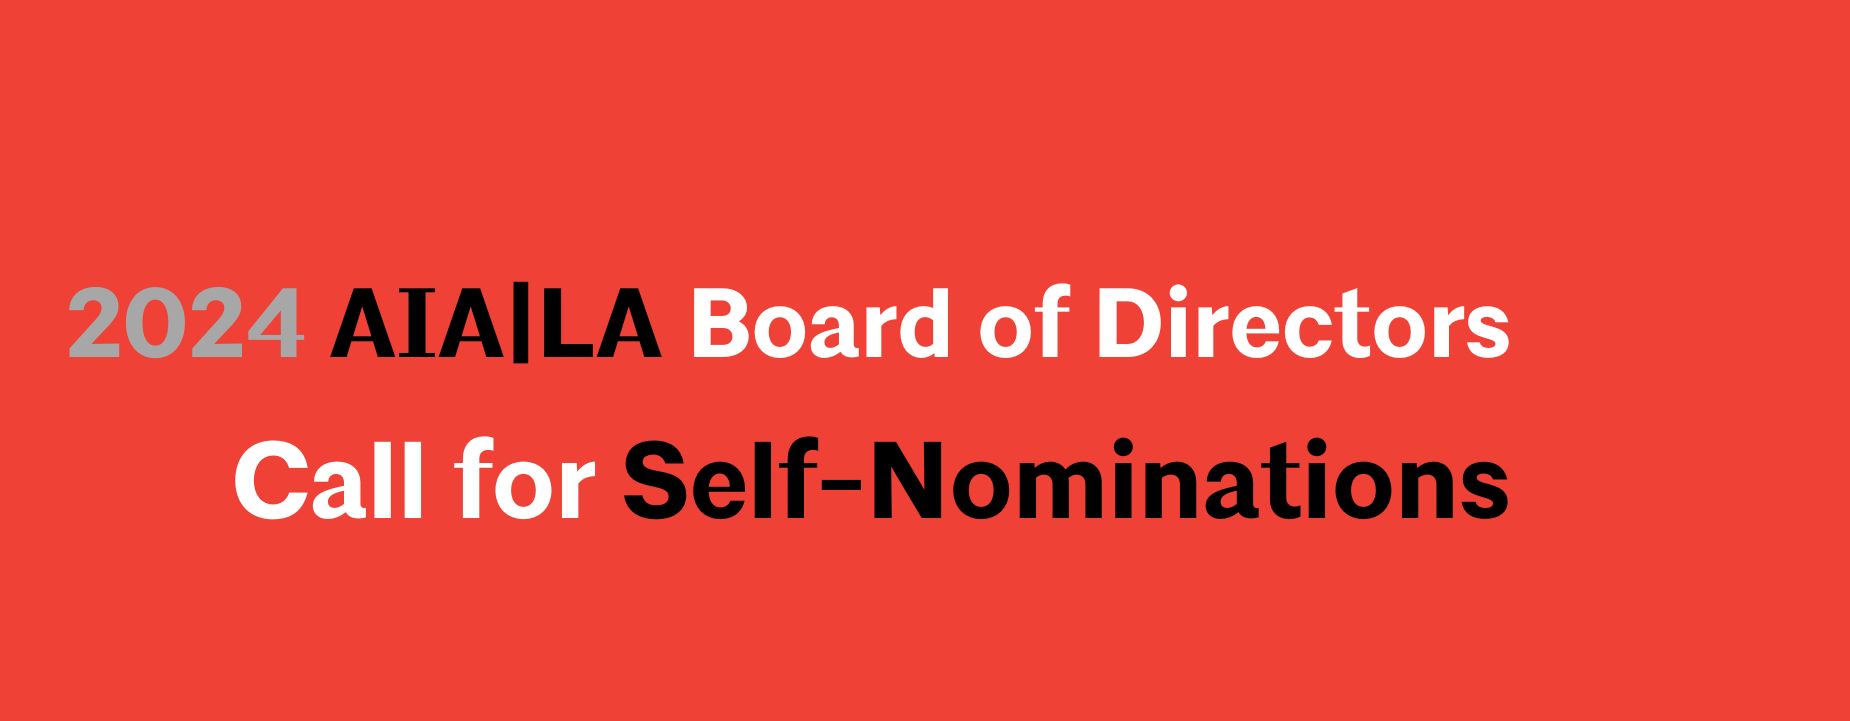 Call for AIALA Board Nominations 2024 AIA Los Angeles